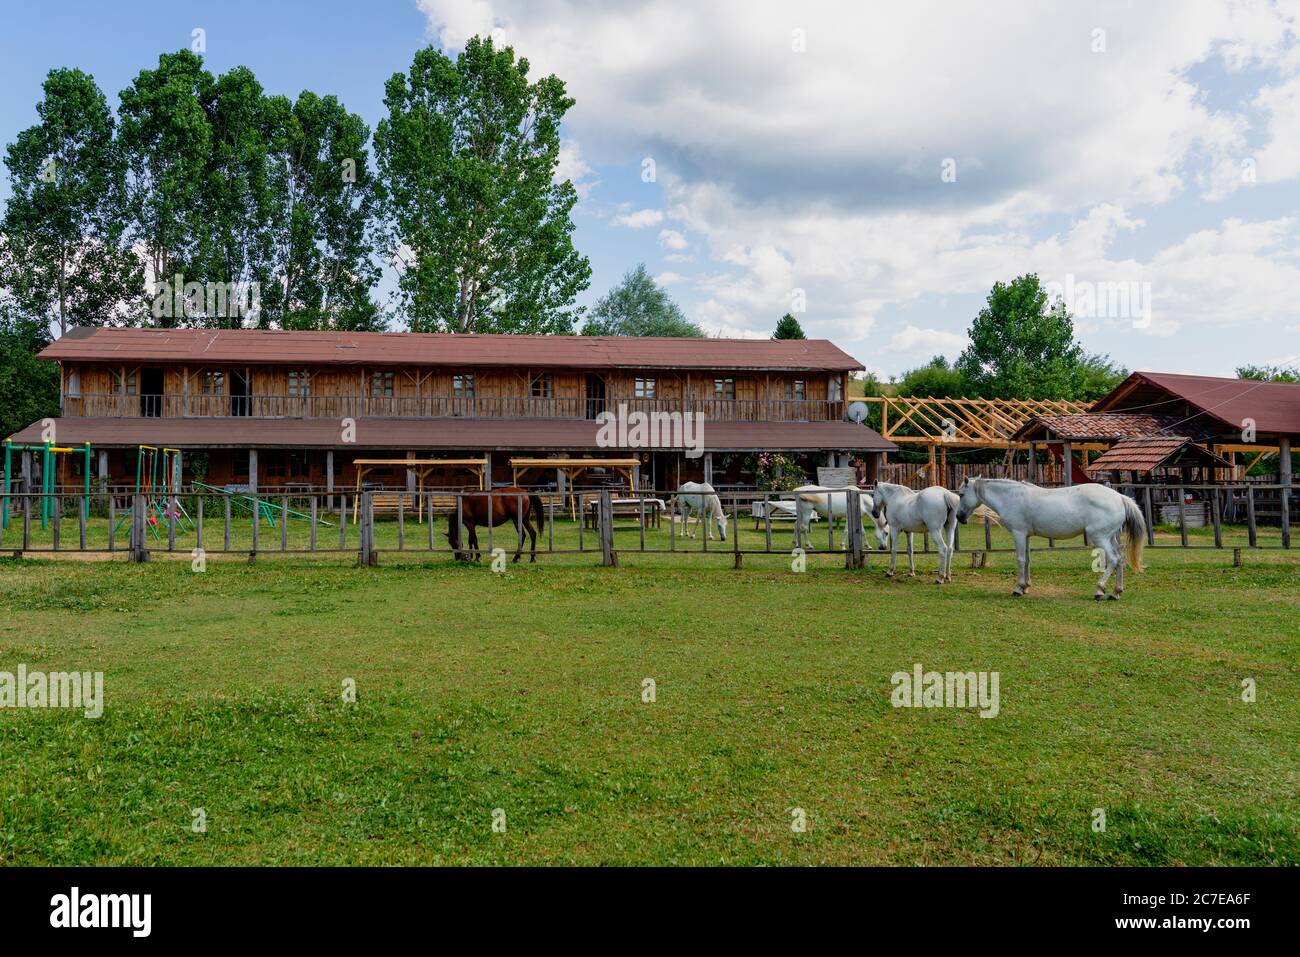 Lifestyle on the horse farm in the city of Daday. Horses graze right in front of the horse farm. Stock Photo